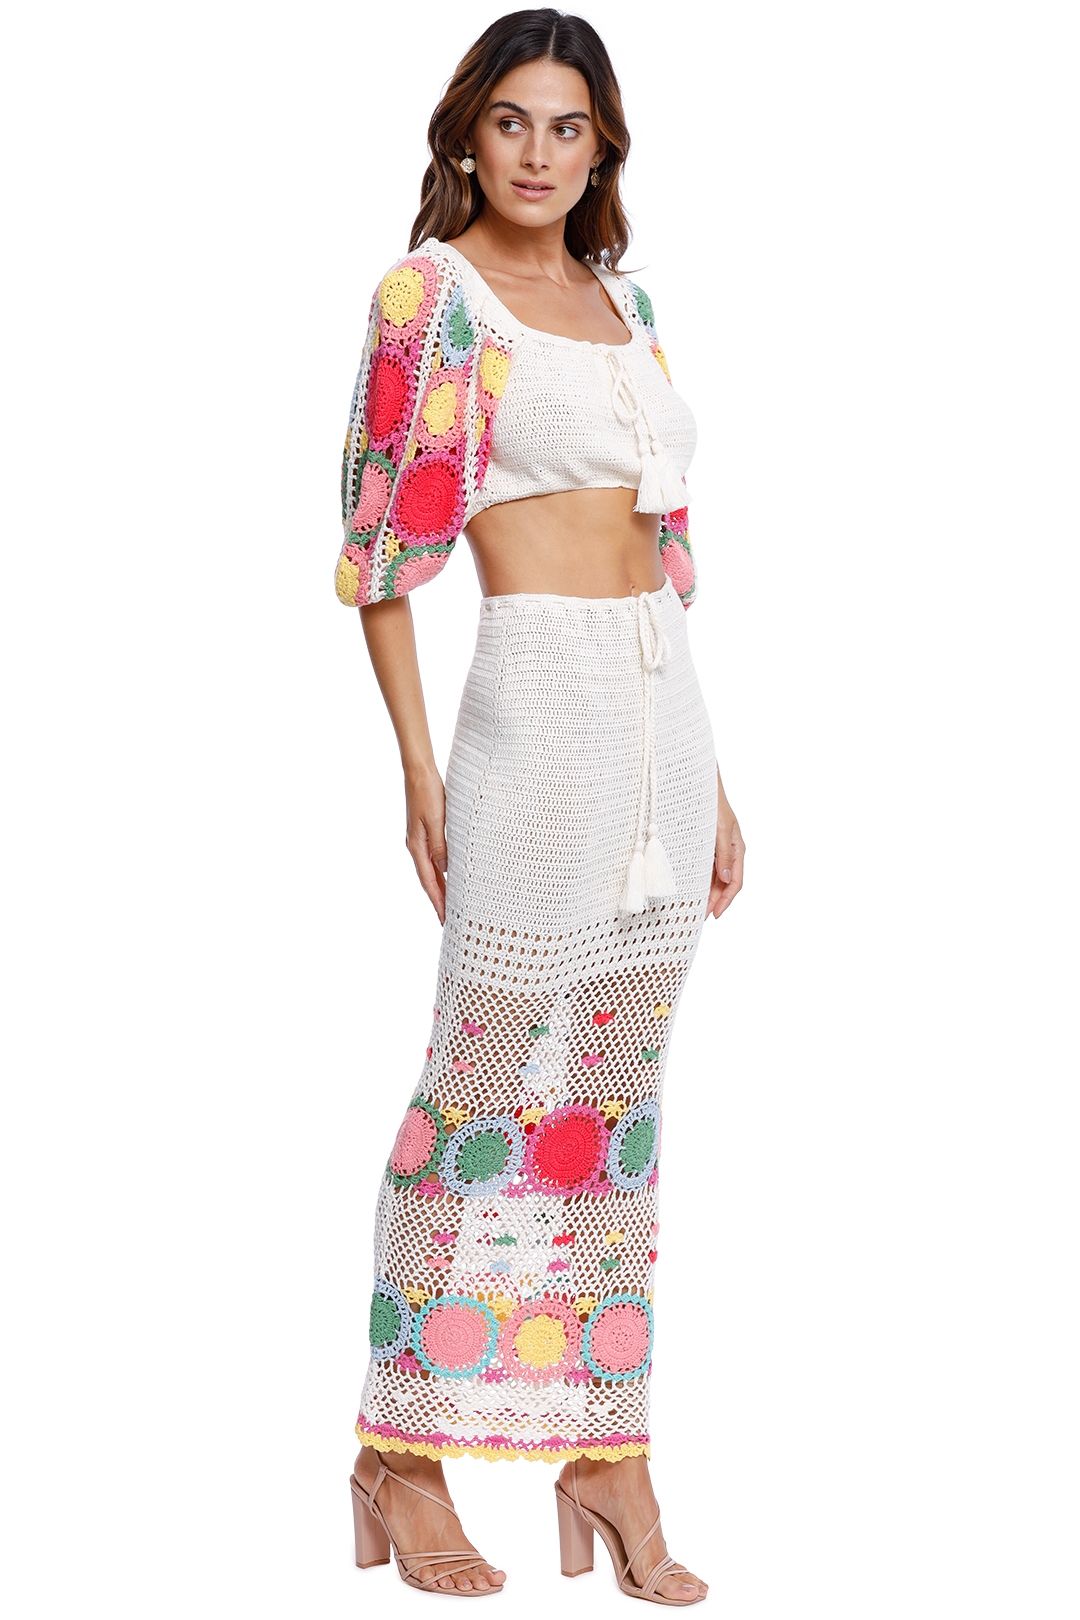 Let the Sunshine in Crochet Top and Skirt Set cutout